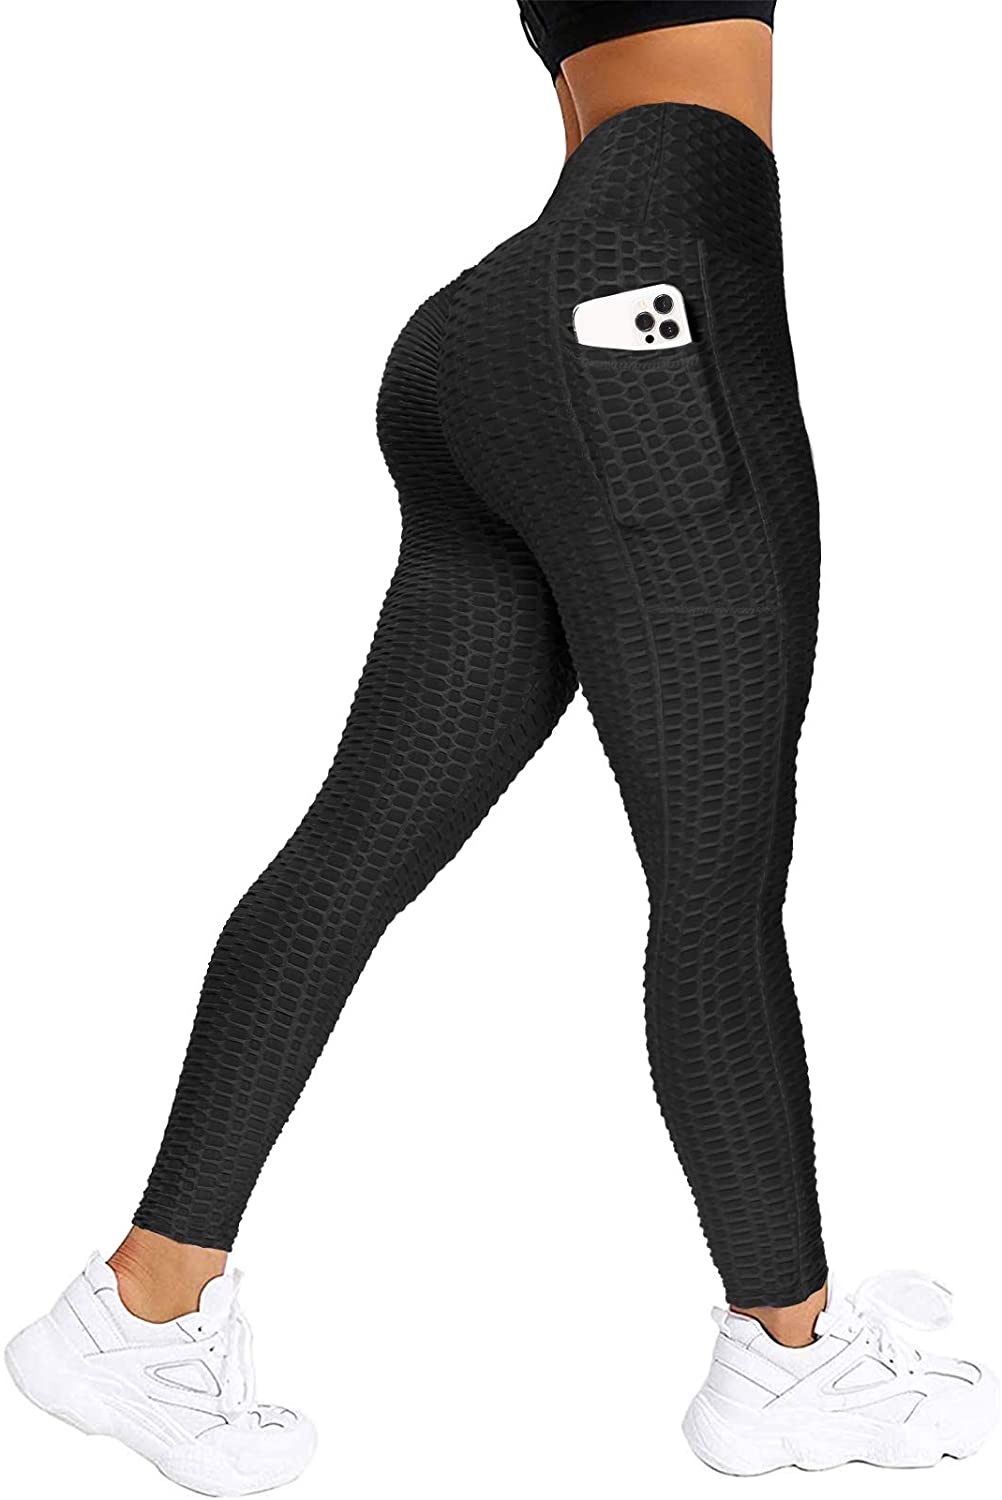 Womens Anti-Cellulite Yoga Pants Leggings Butt Lift Ruched Sports Gym Fitness H1 